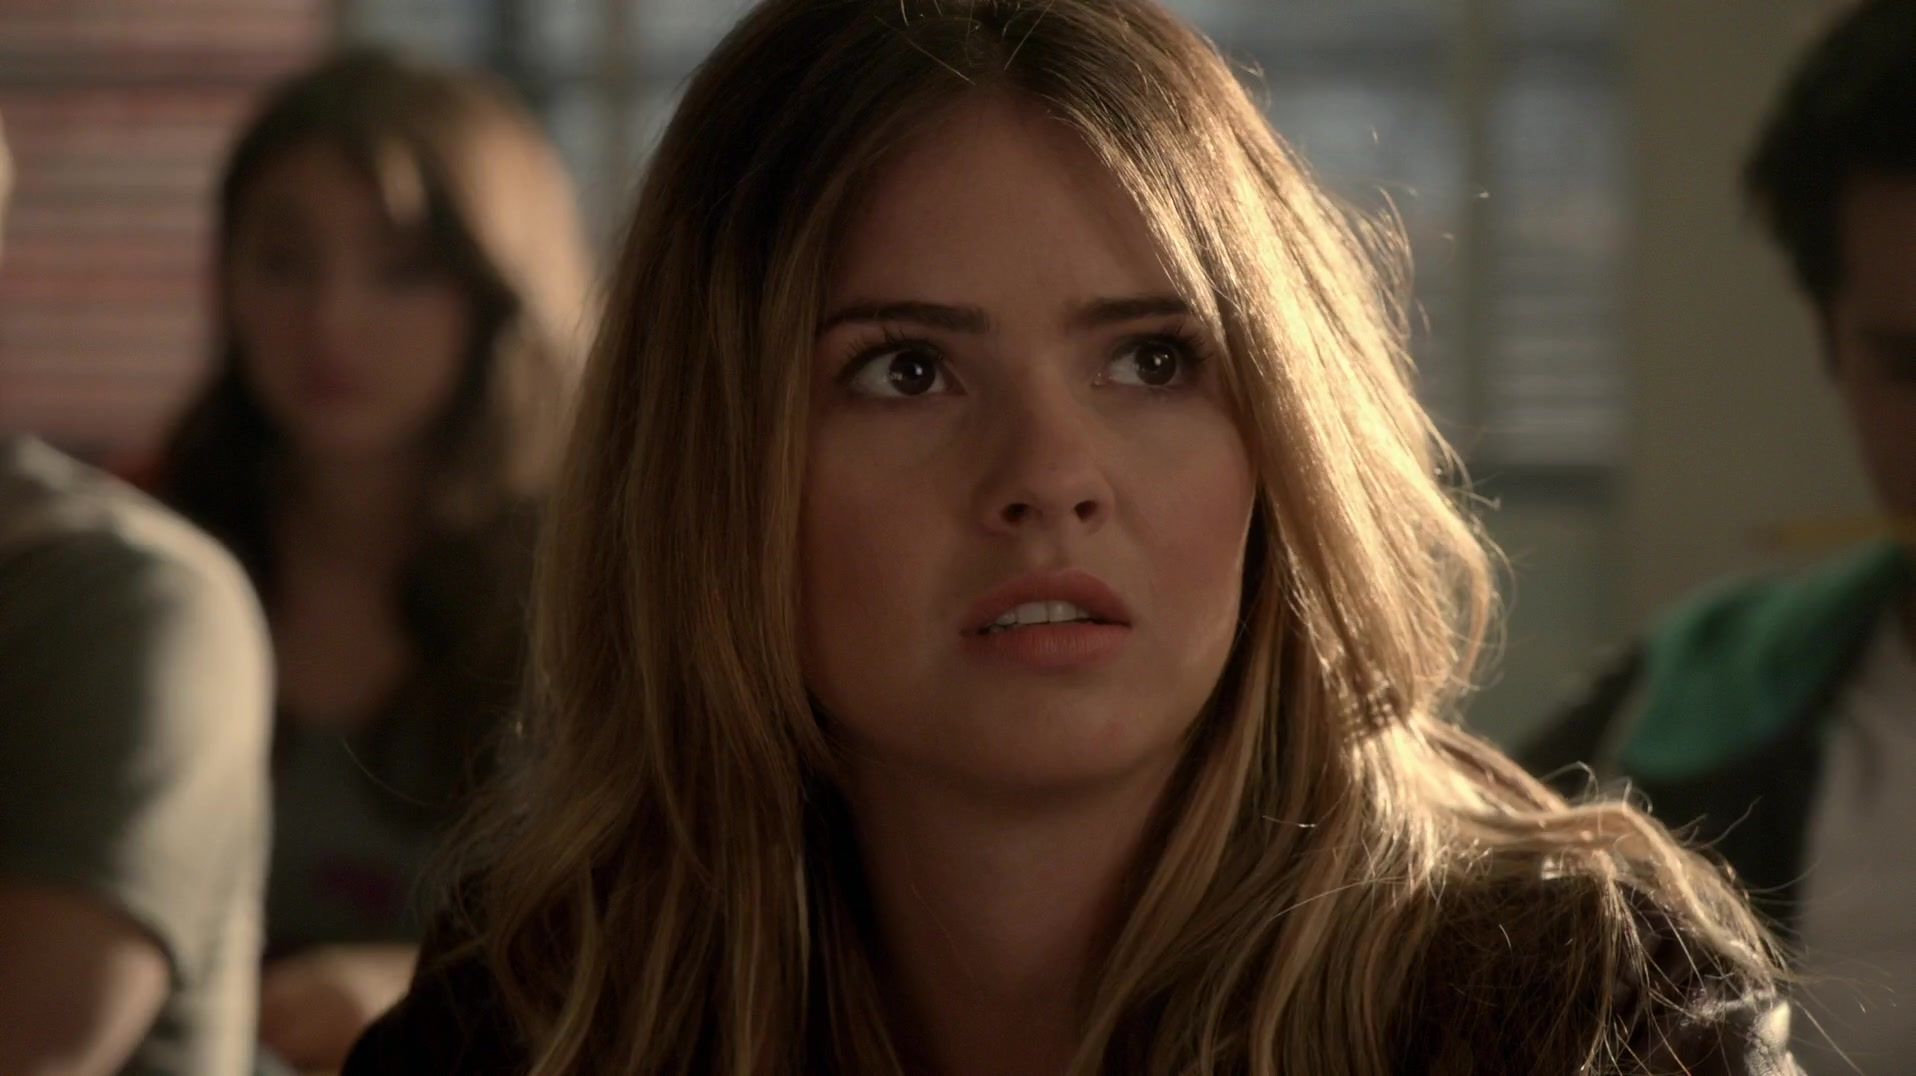 Pictures Of Shelley Hennig